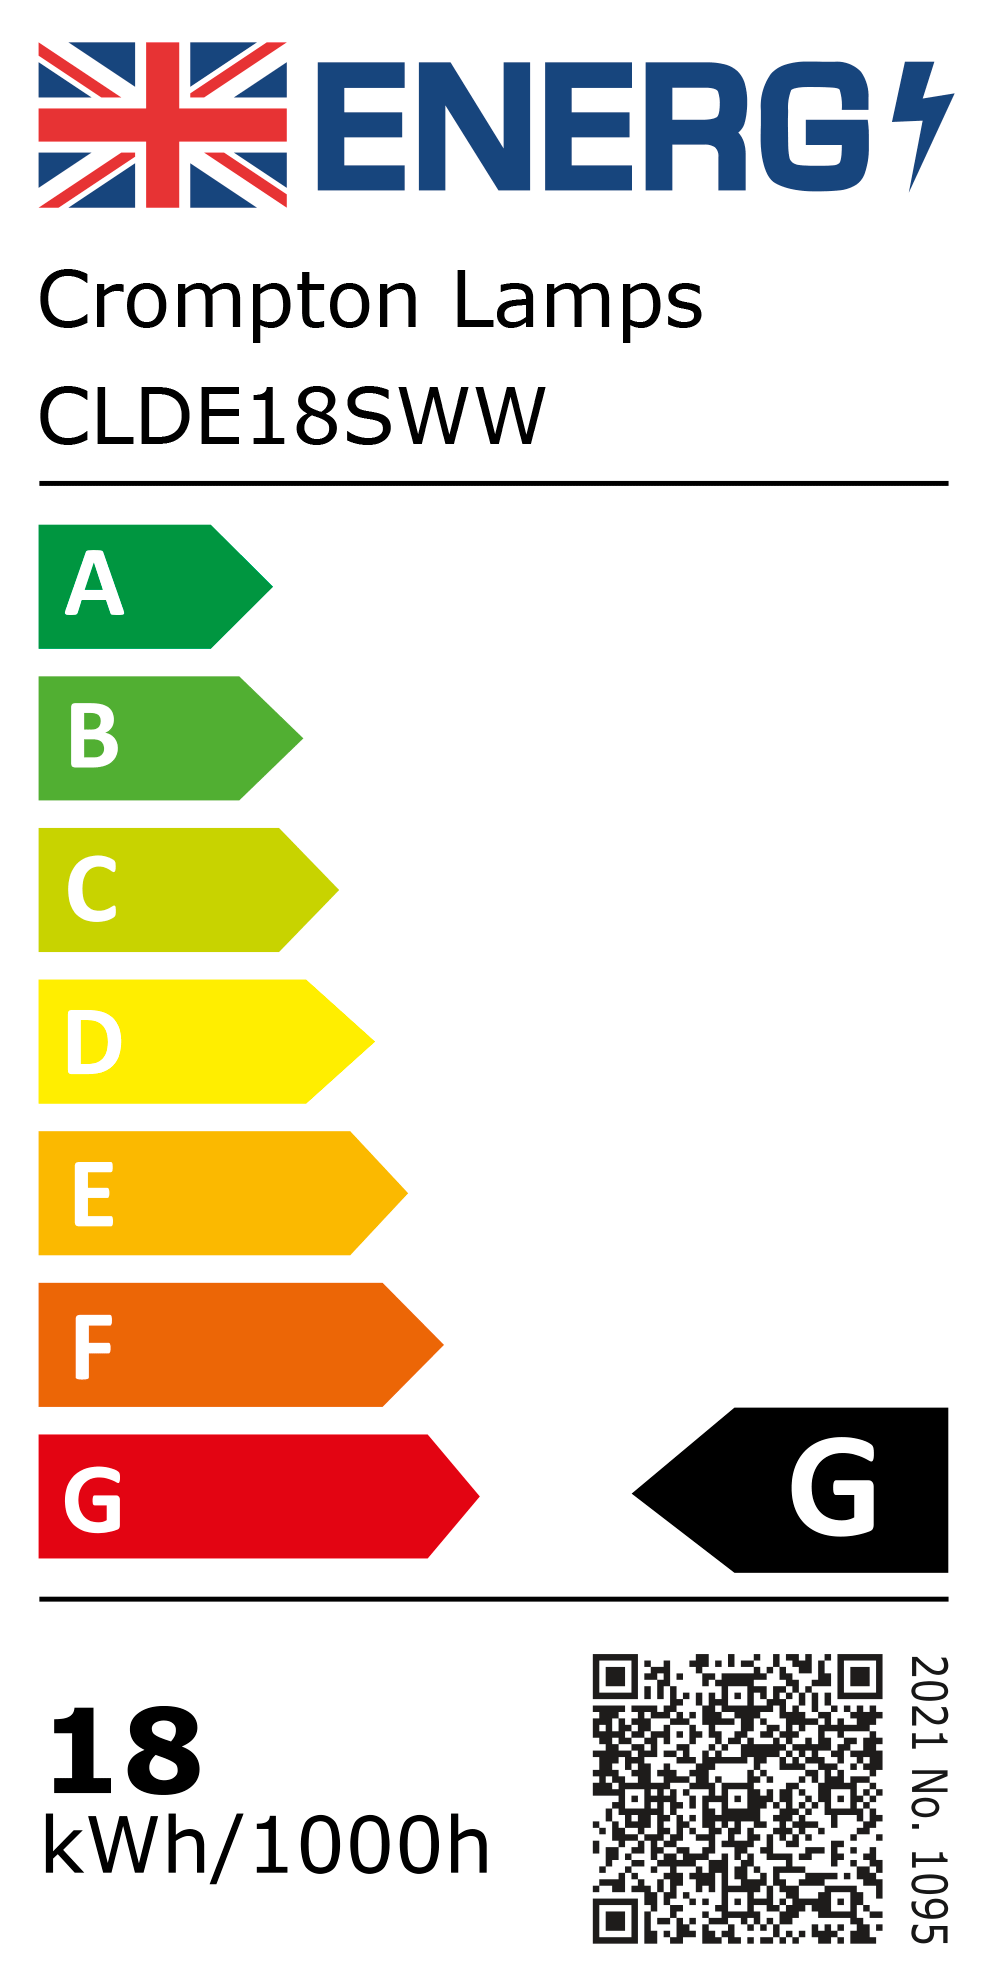 New 2021 Energy Rating Label: Stock Code CLDE18SWW